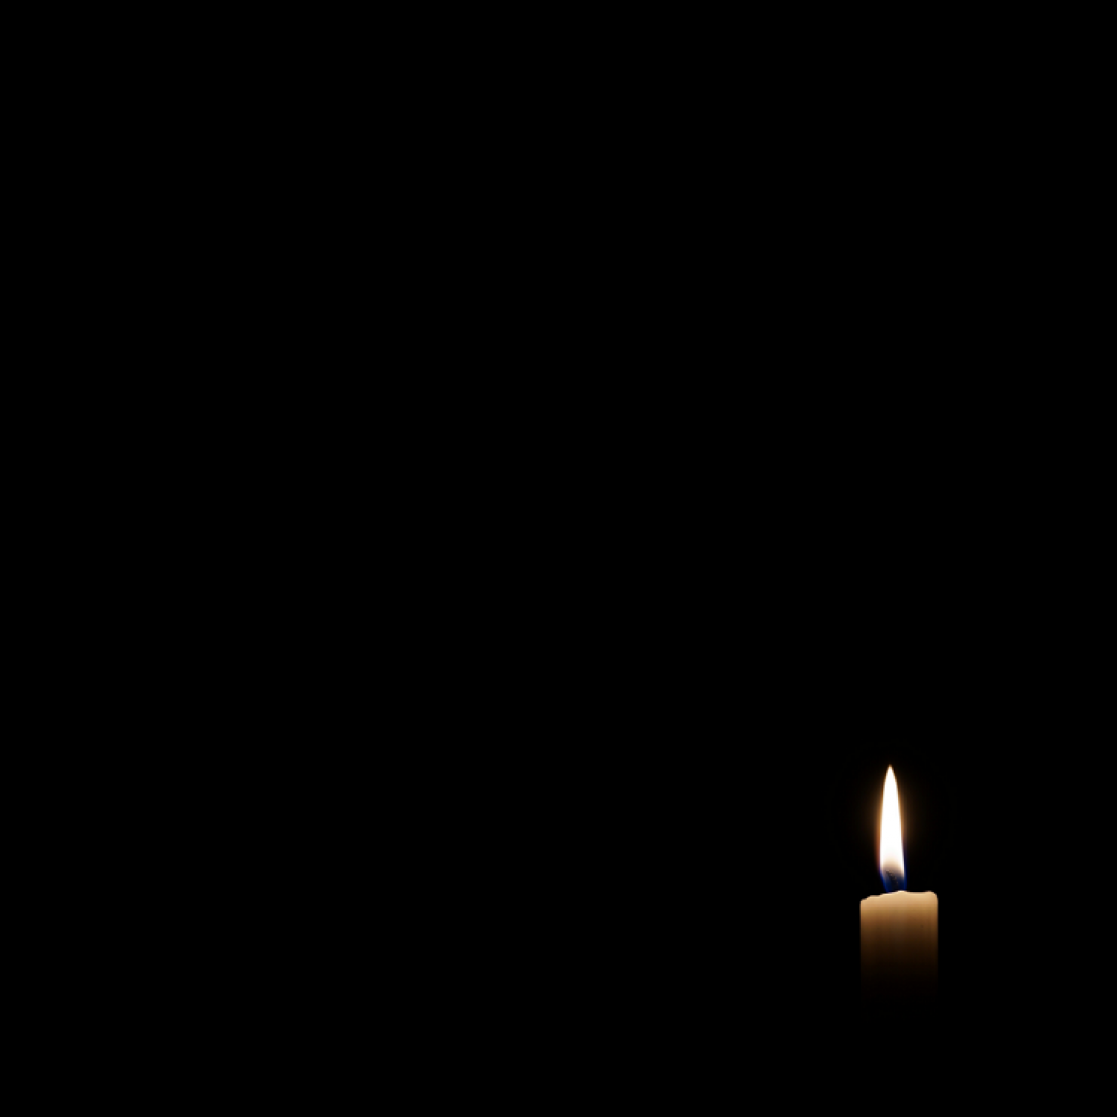 Candle light up in the dark 